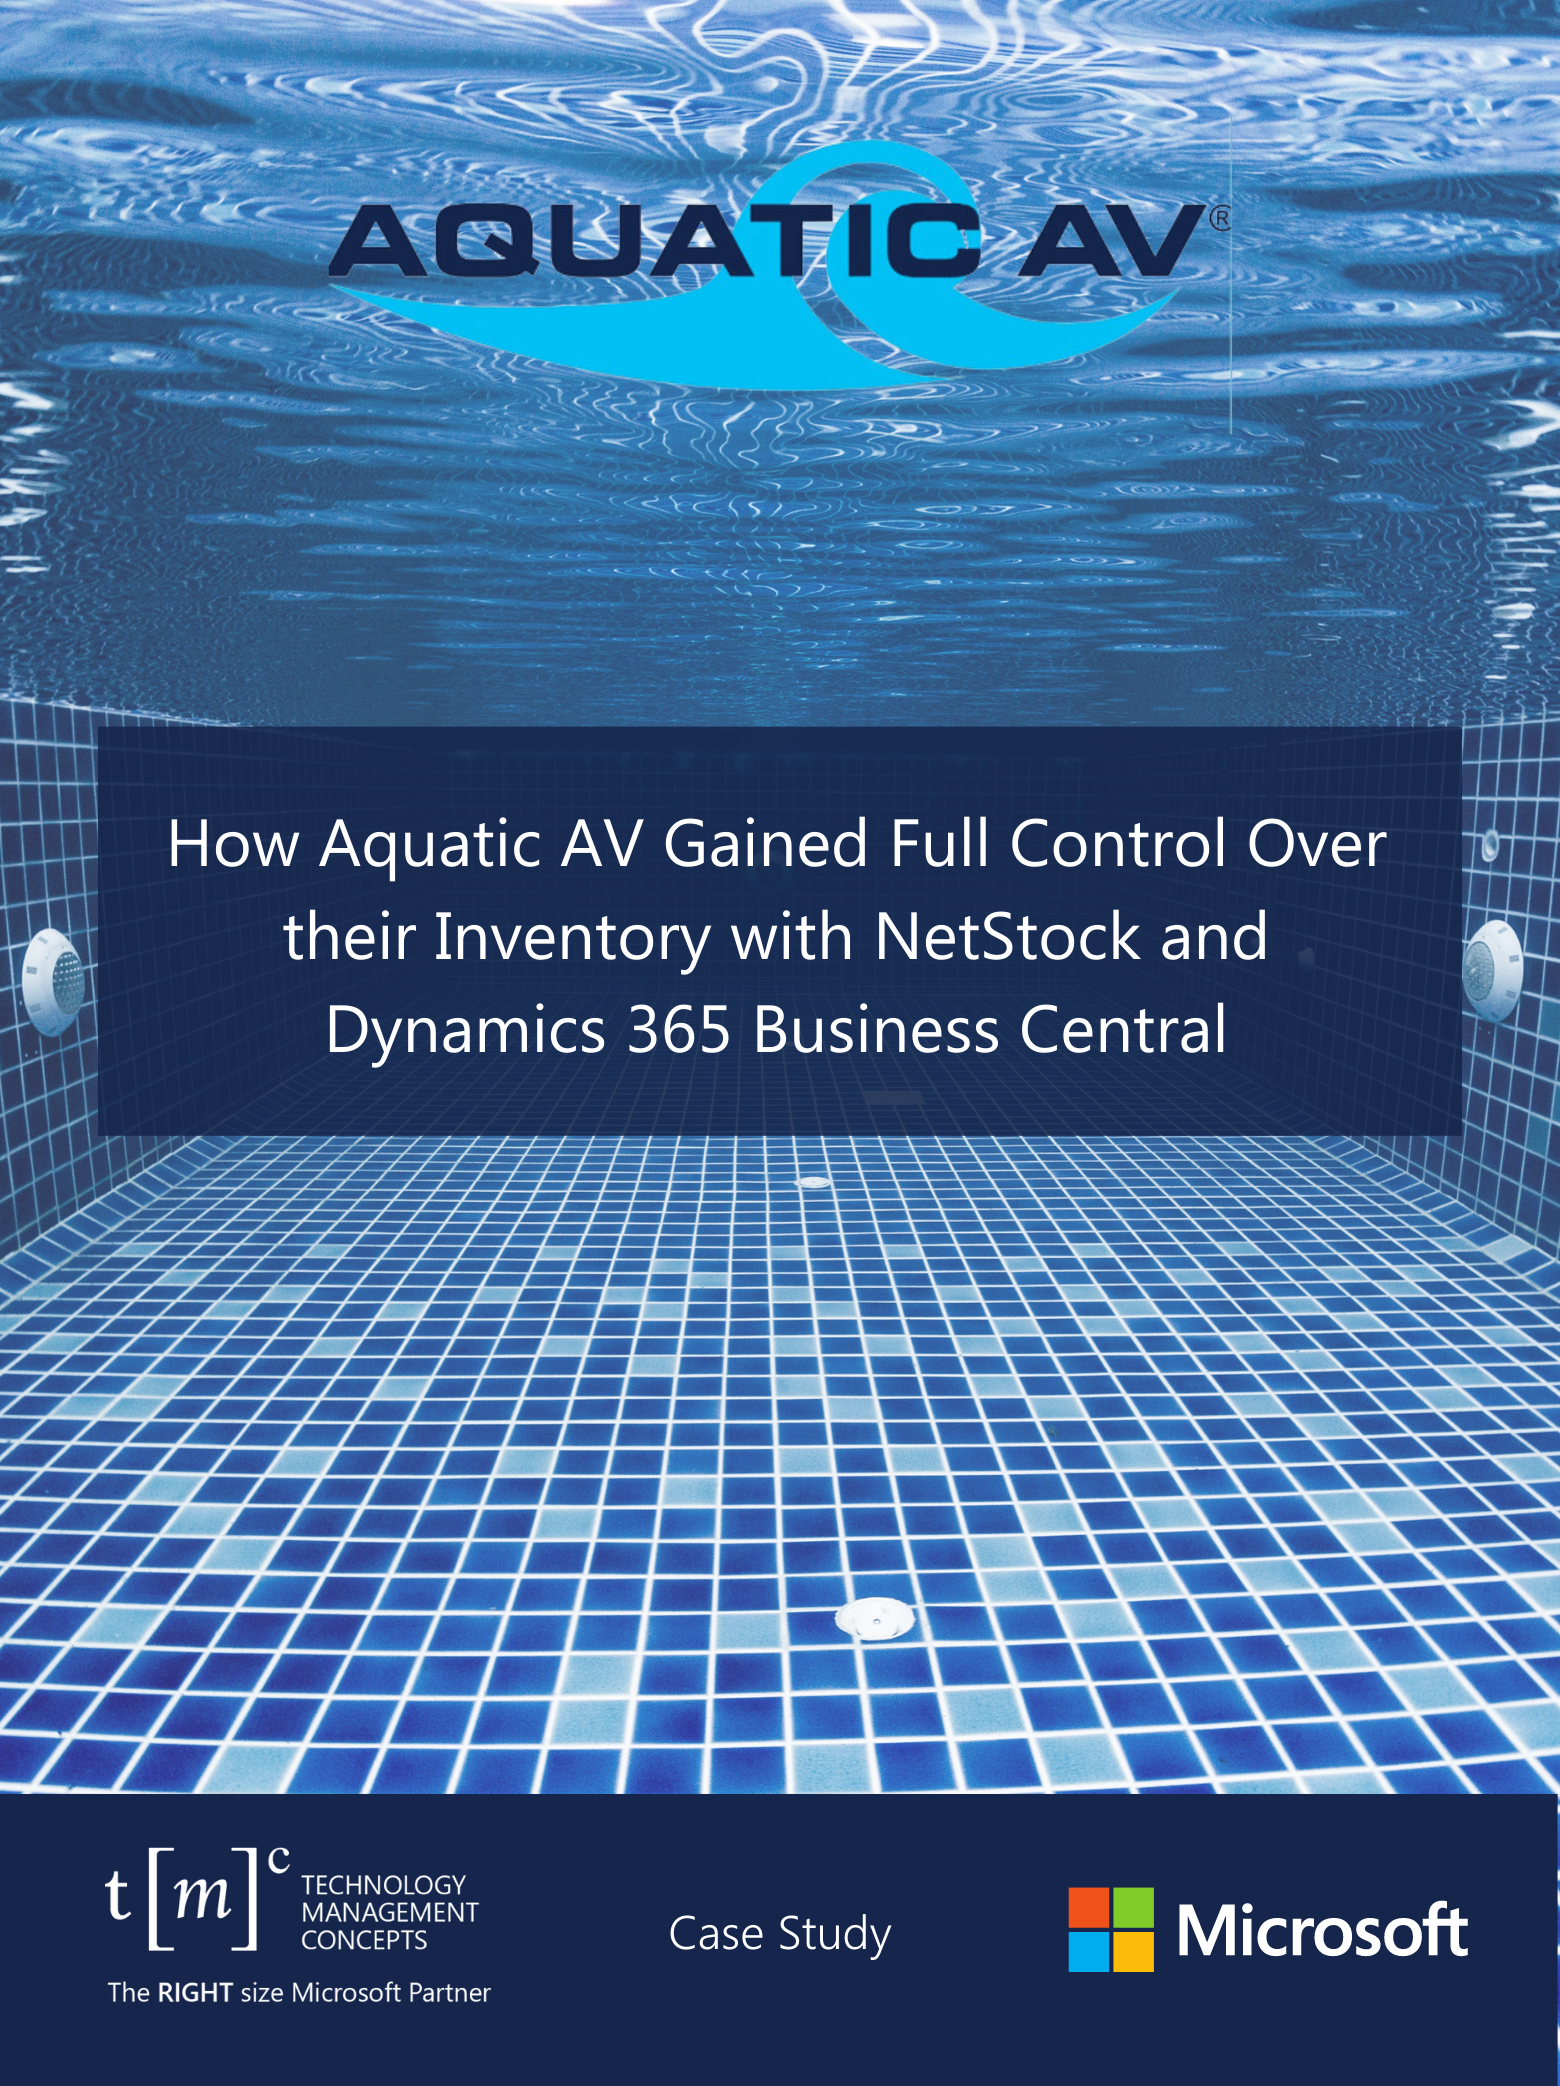 Learn How Aquatic AV Gained Full Control Over their Inventory with NetStock and Business Central